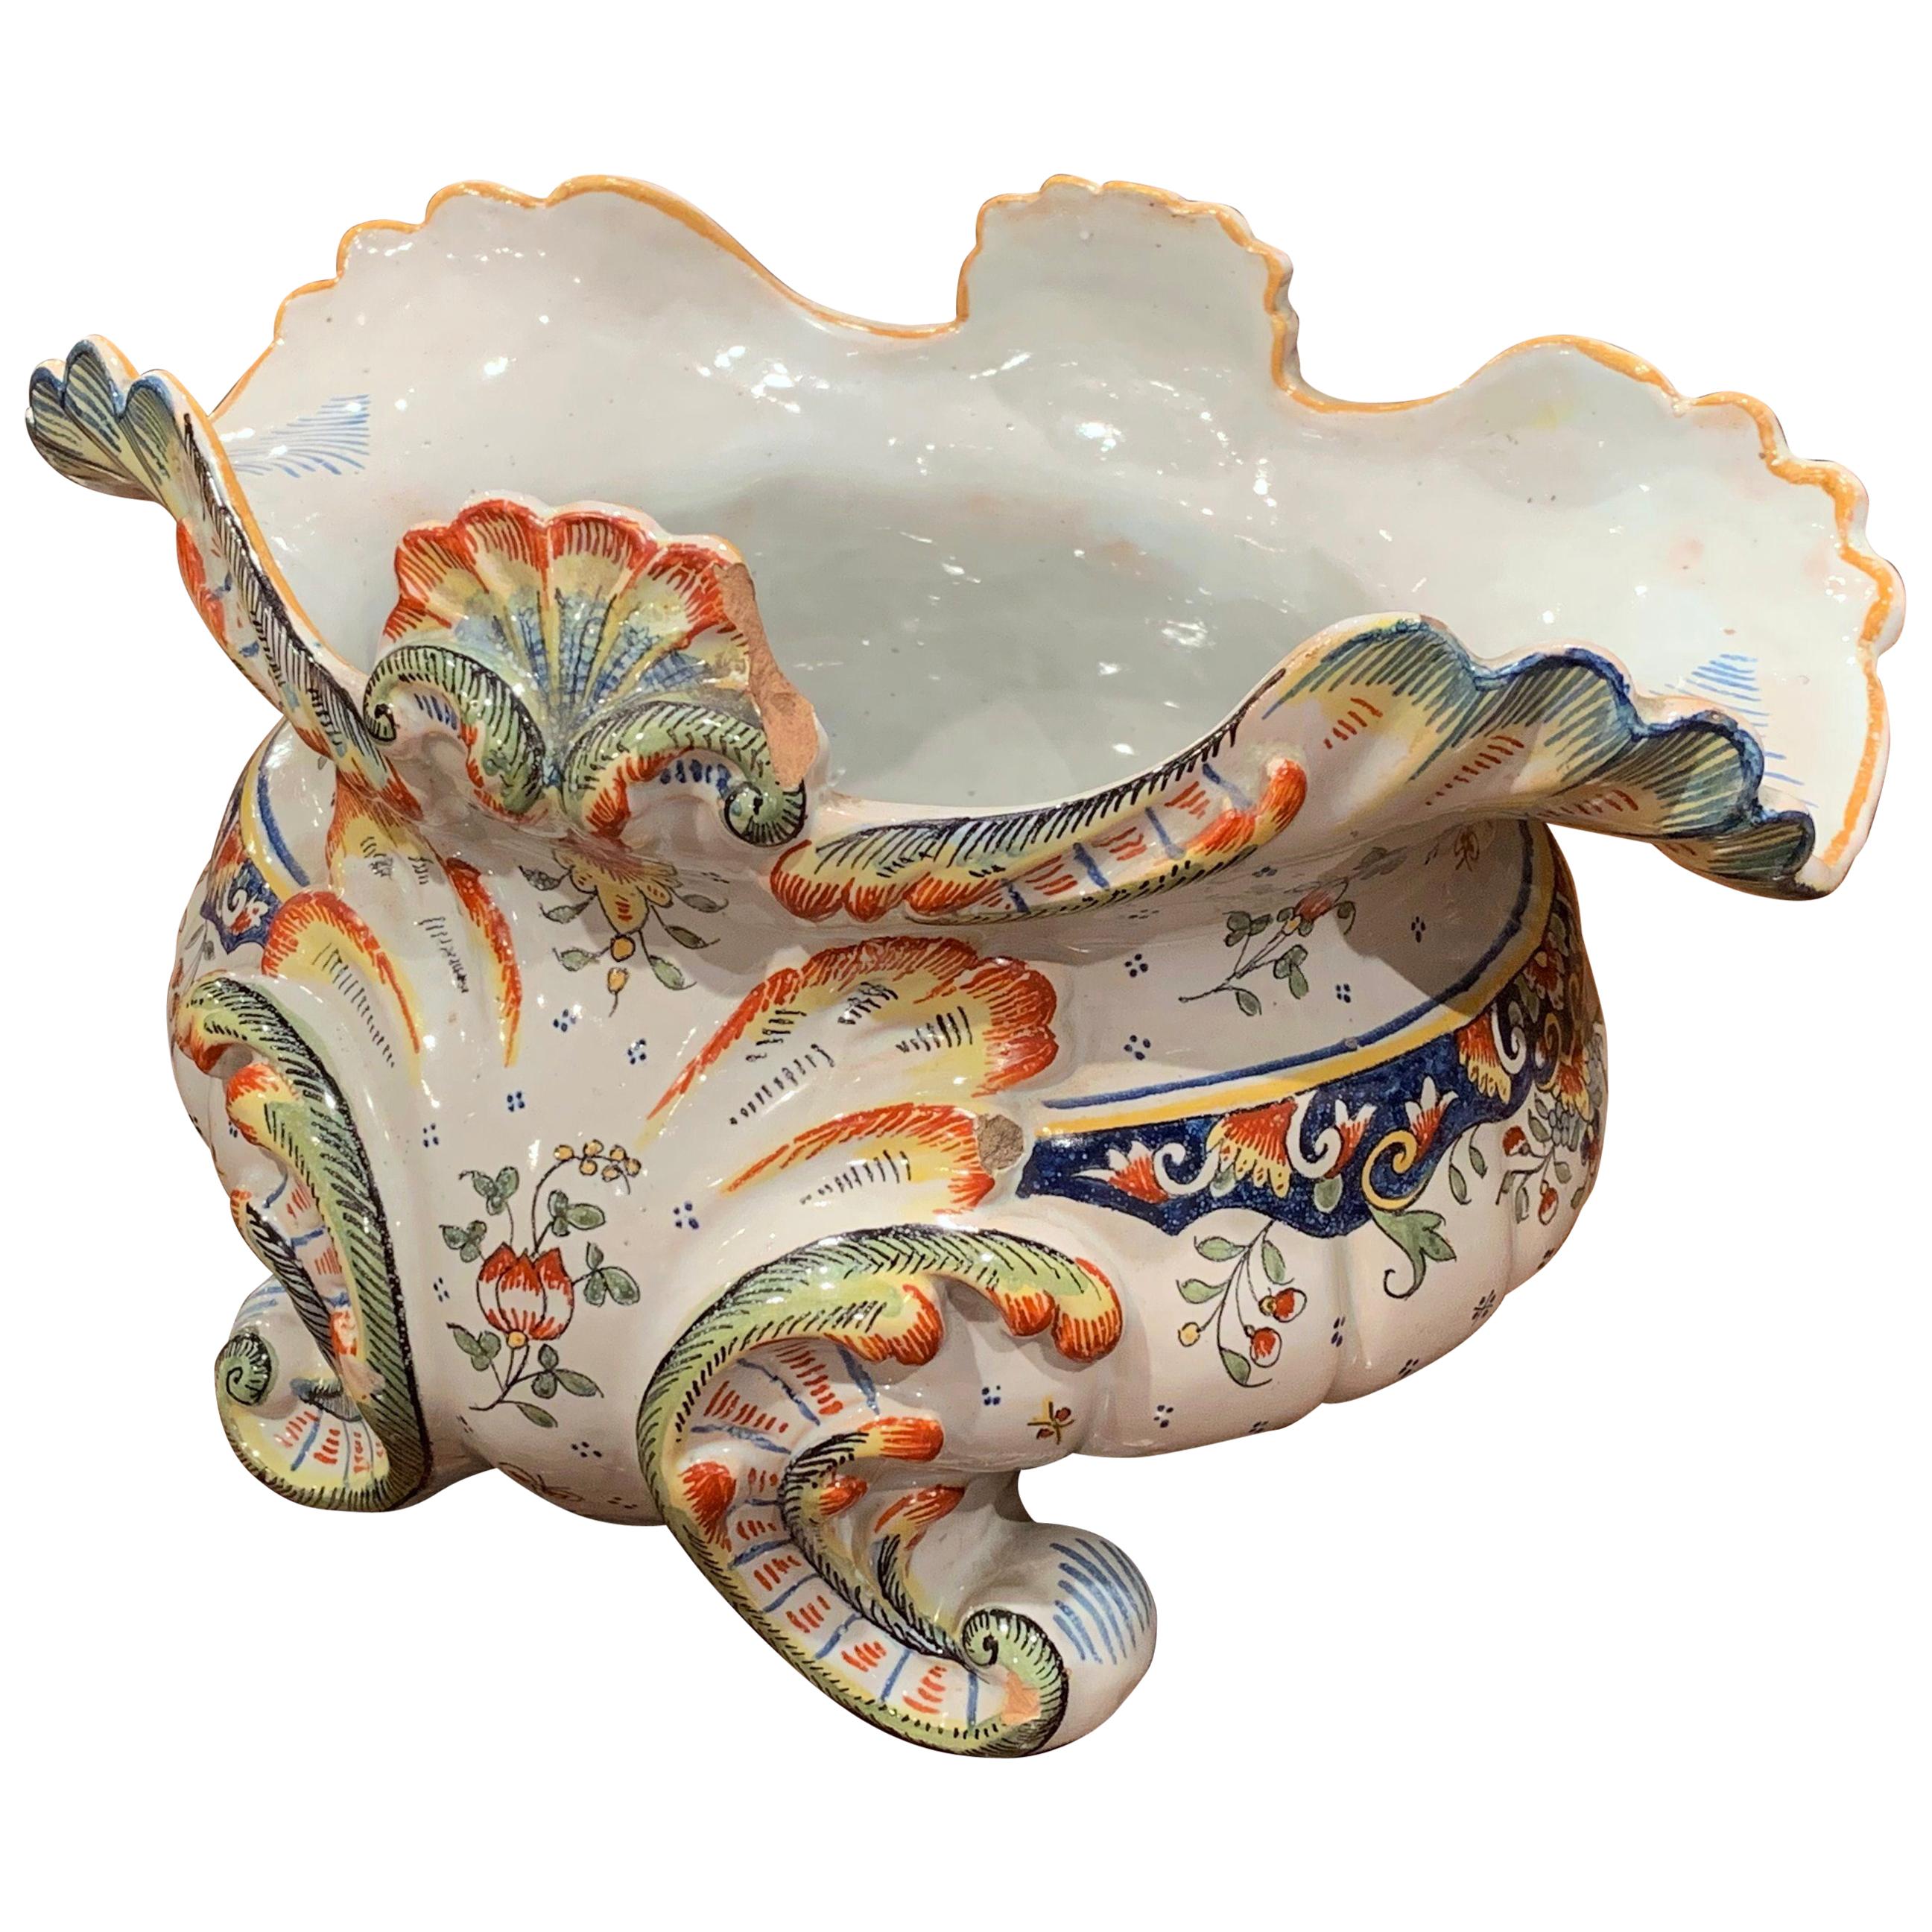 Decorate a table or a buffet with this elegant antique planter. Crafted in Rouen, Normandy, France circa 1920, the colorful cachepot sits on four scroll feet and features a scalloped rim with shell motifs. The piece is hand painted with floral and